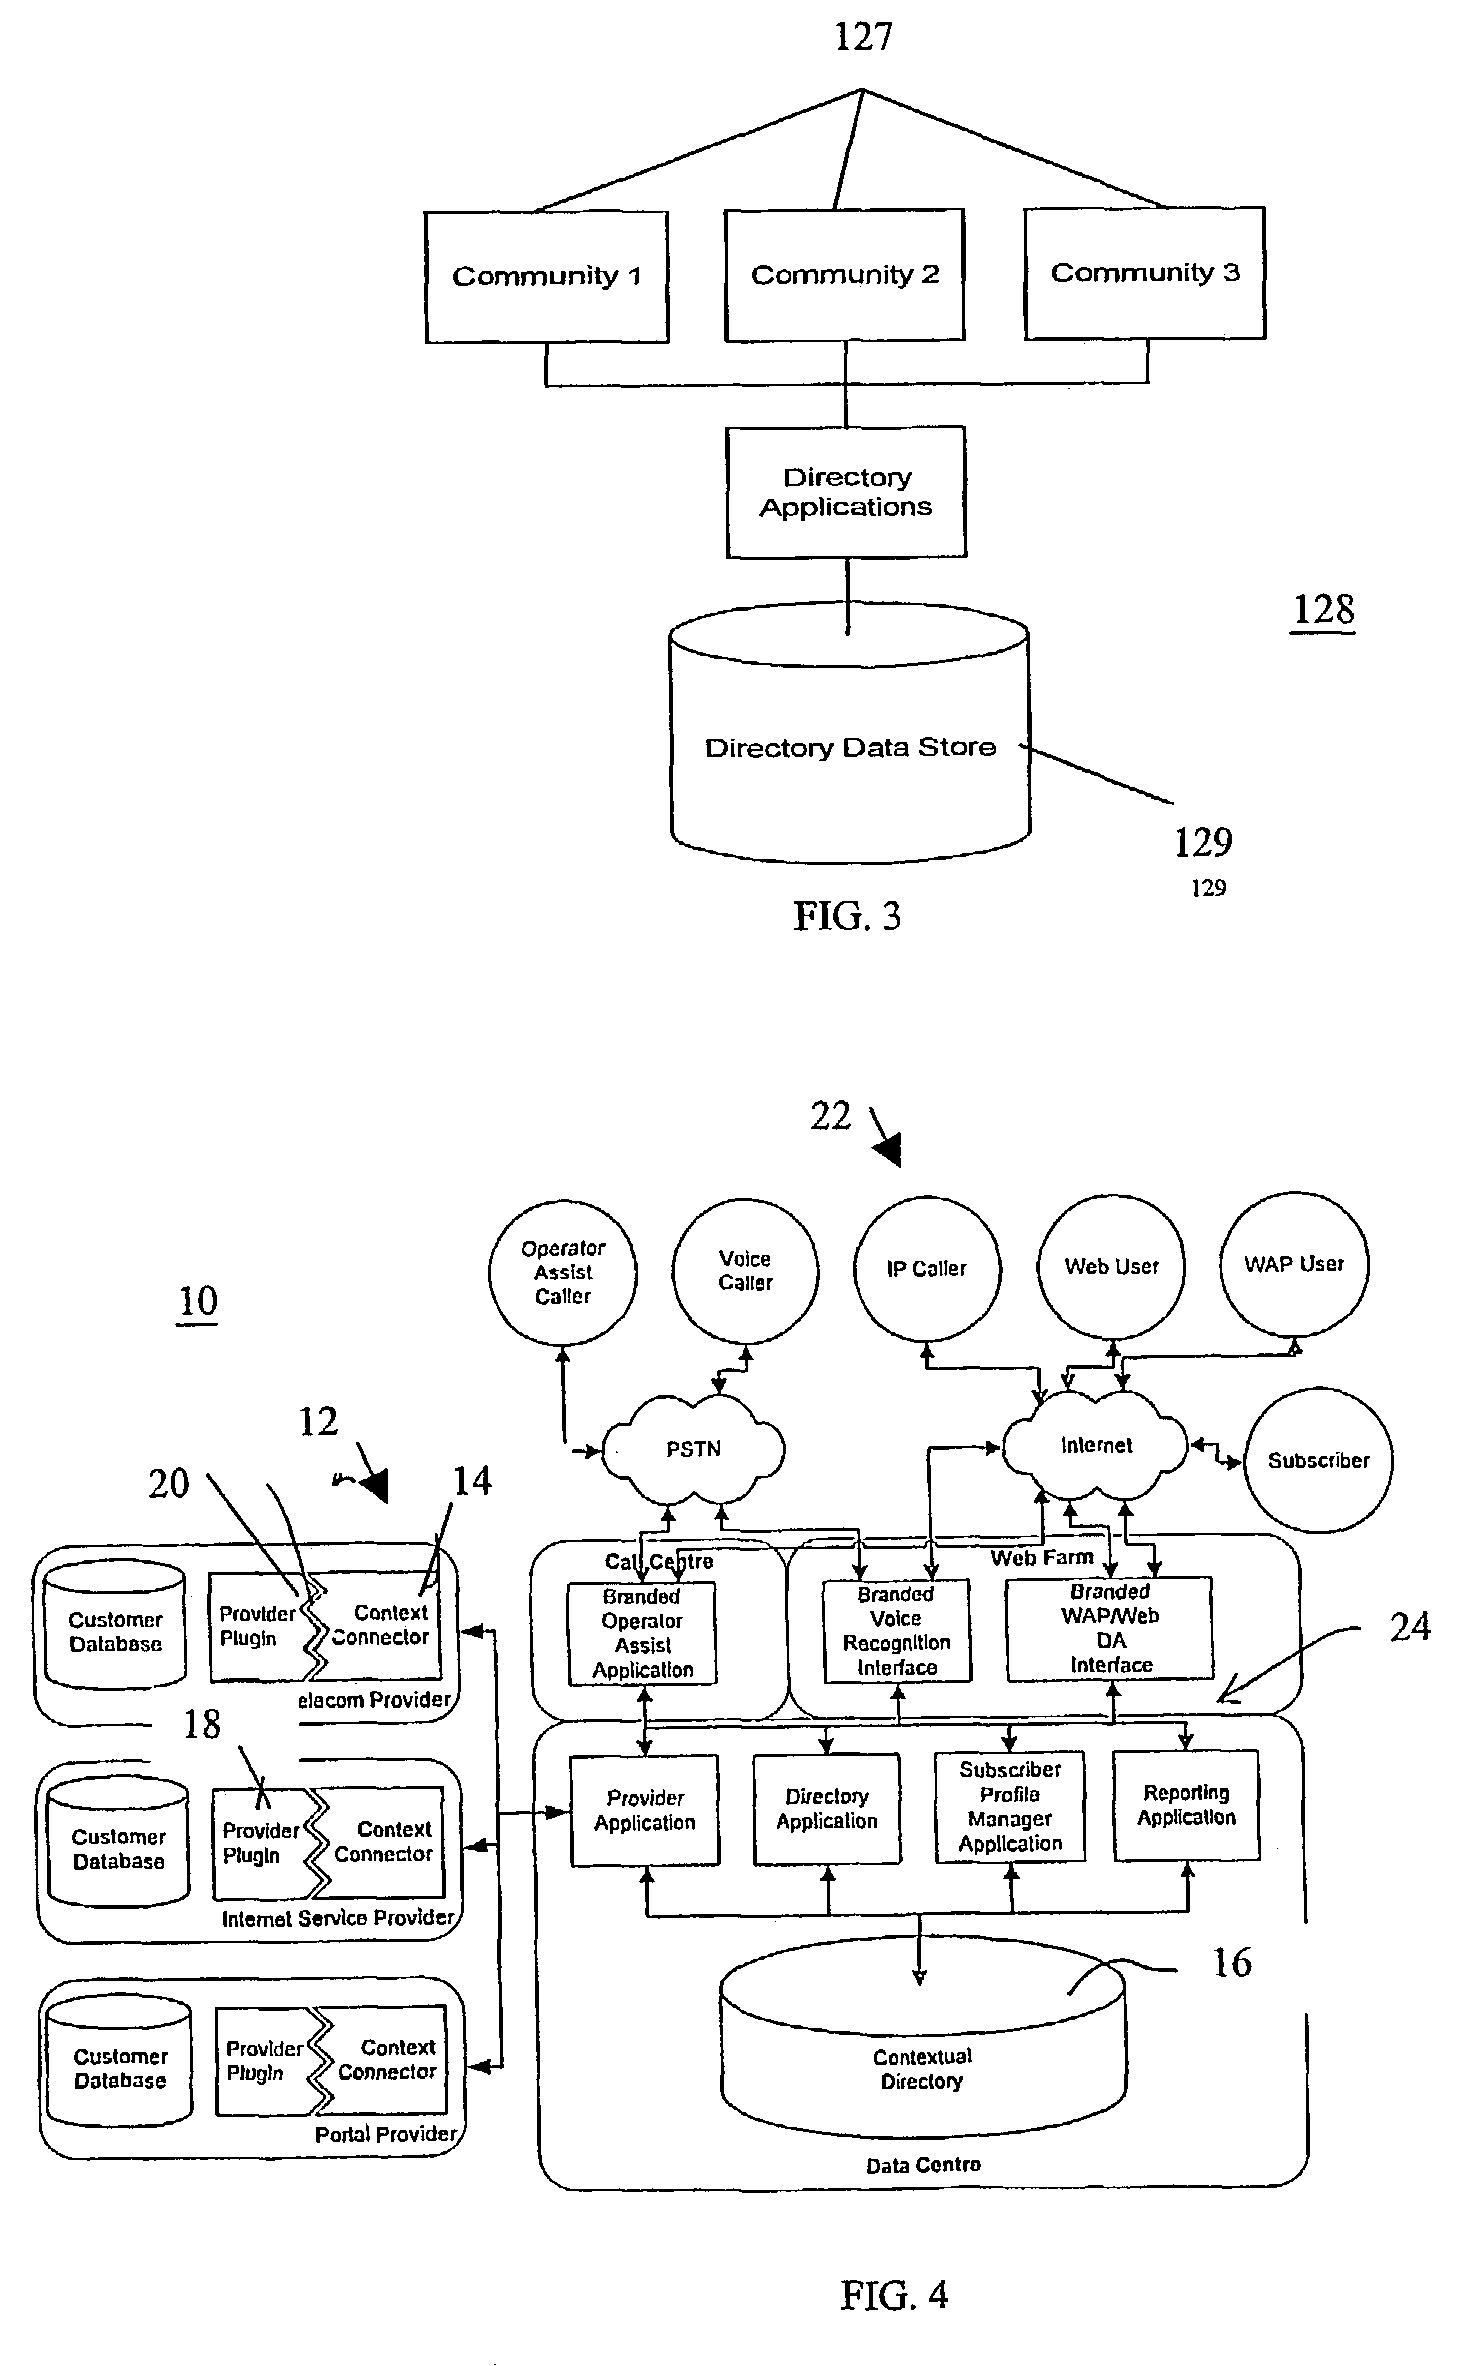 System and method for directory services and e-commerce across multi-provider networks